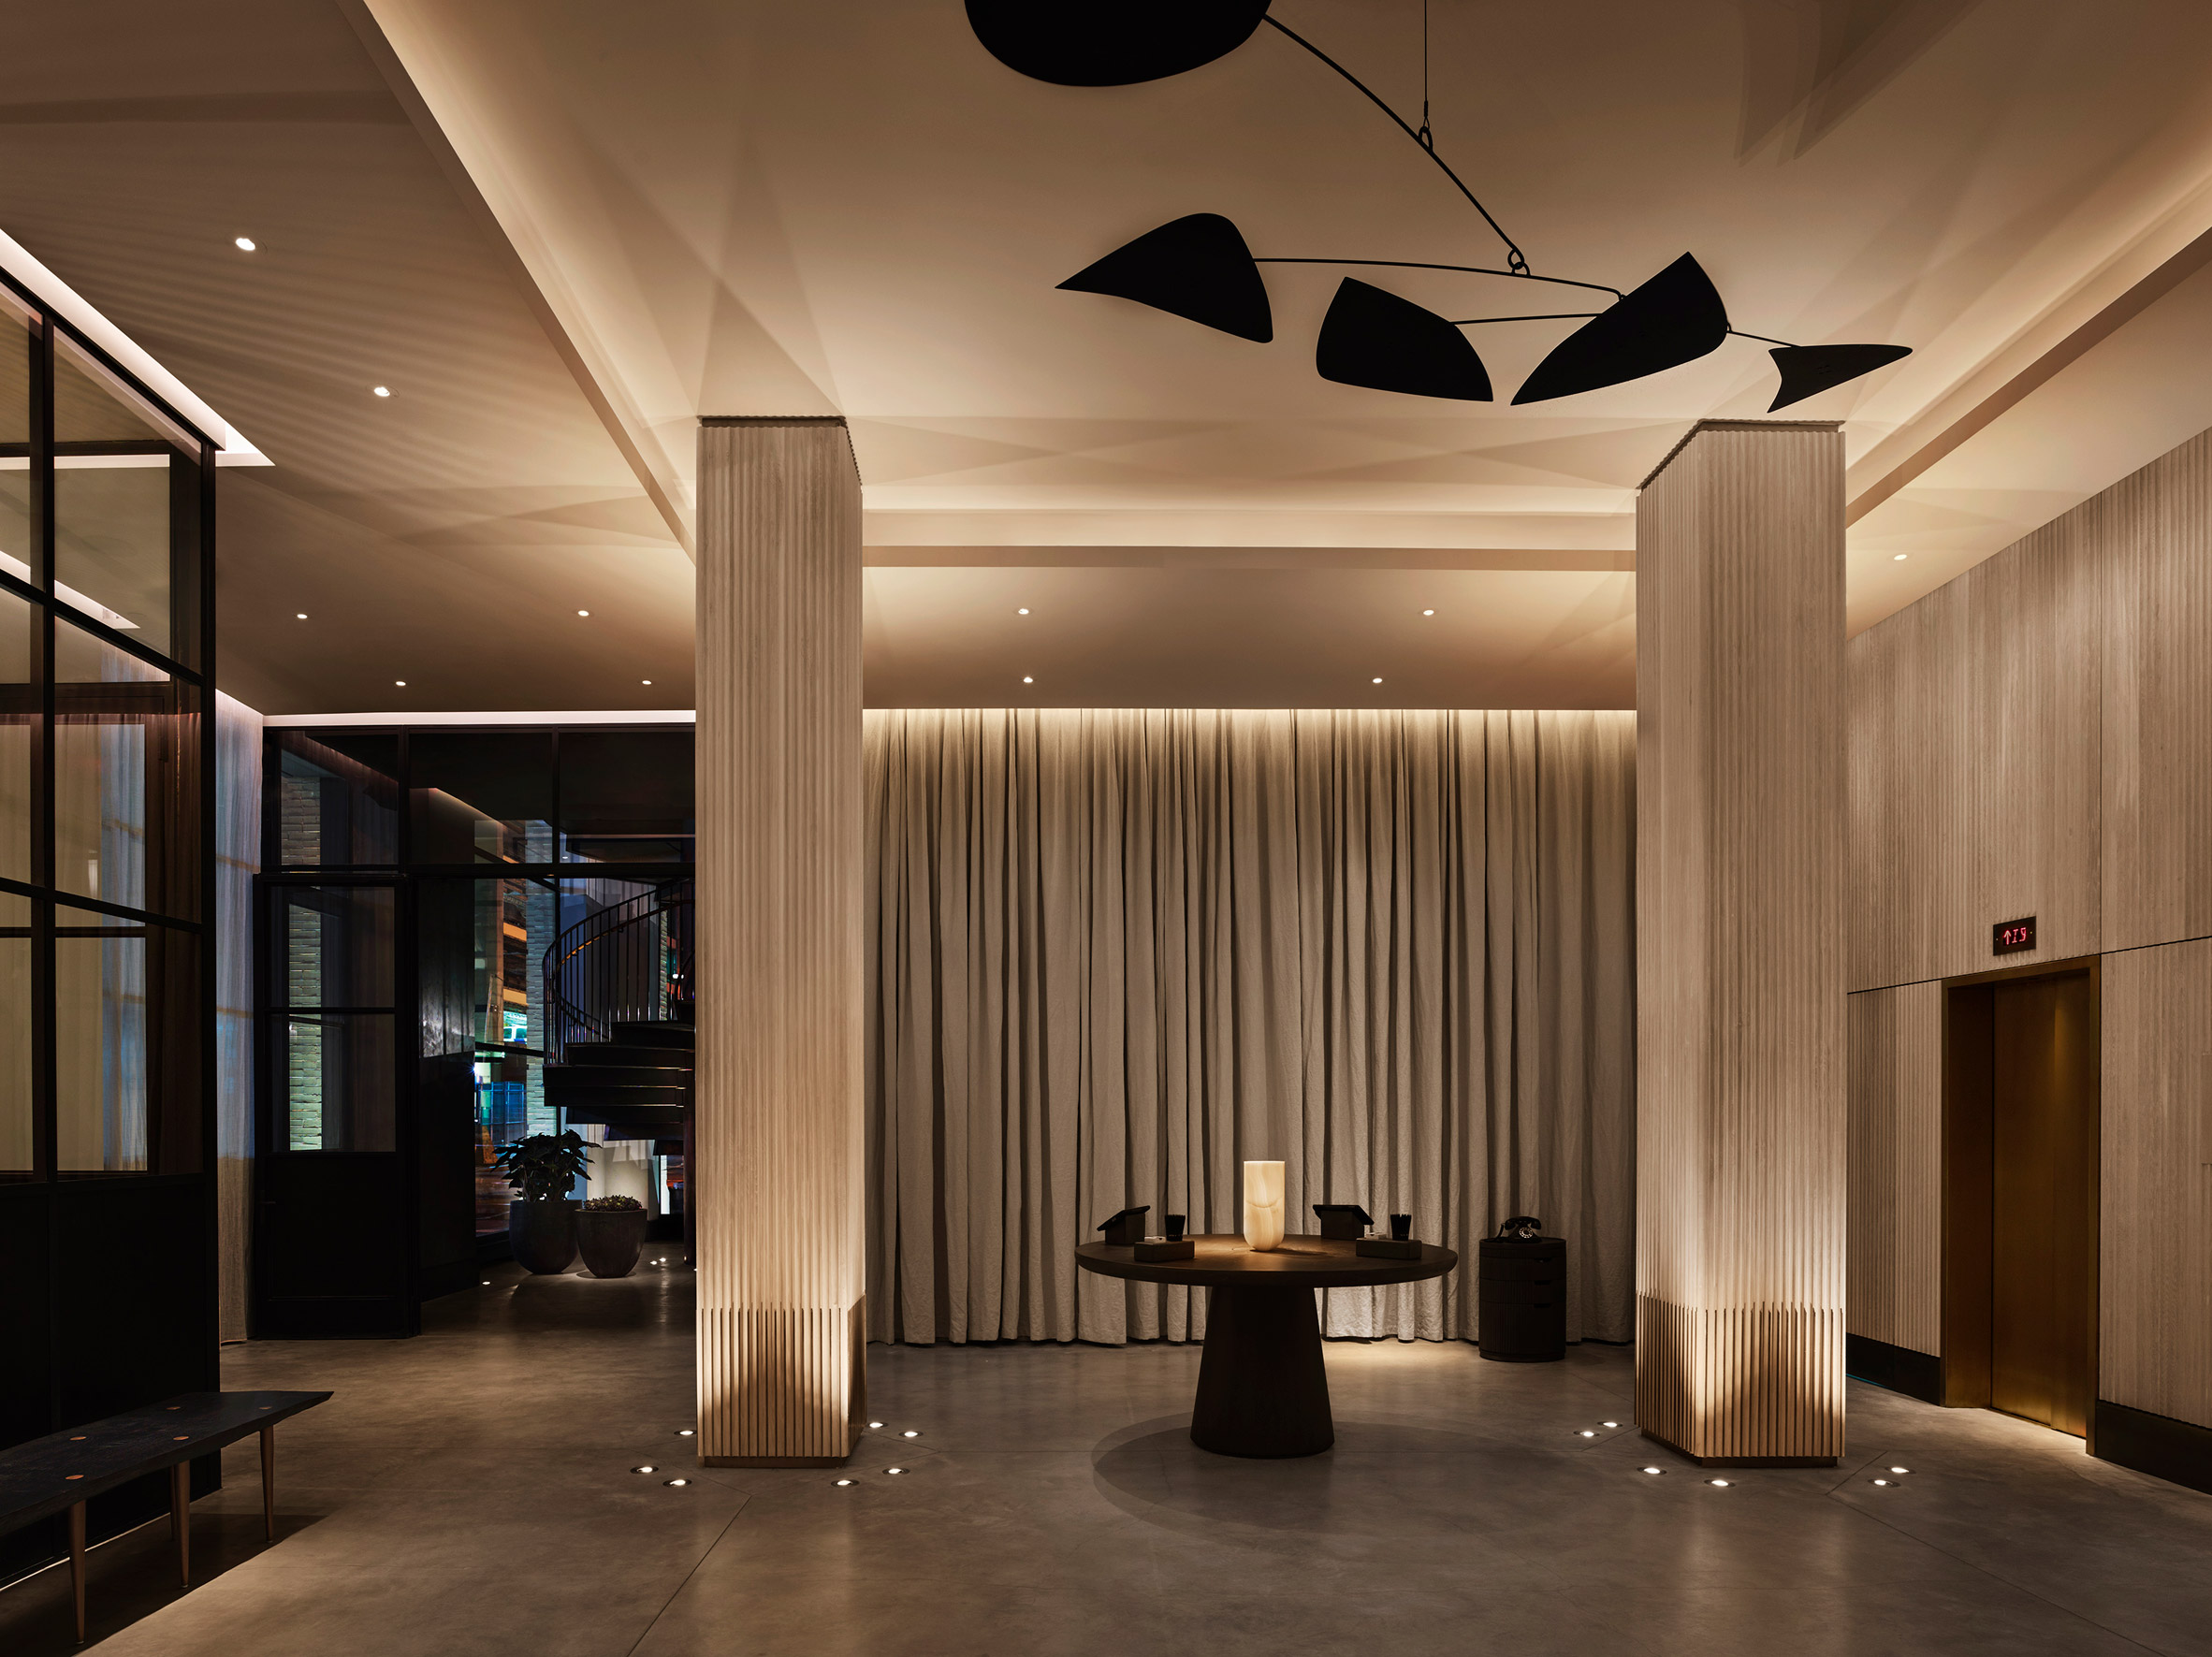 11 Howard won the Hotel Renovation &amp; Restoration and Restaurant categories at the AHEAD Global awards, which were held at the Ham Yard Hotel in London